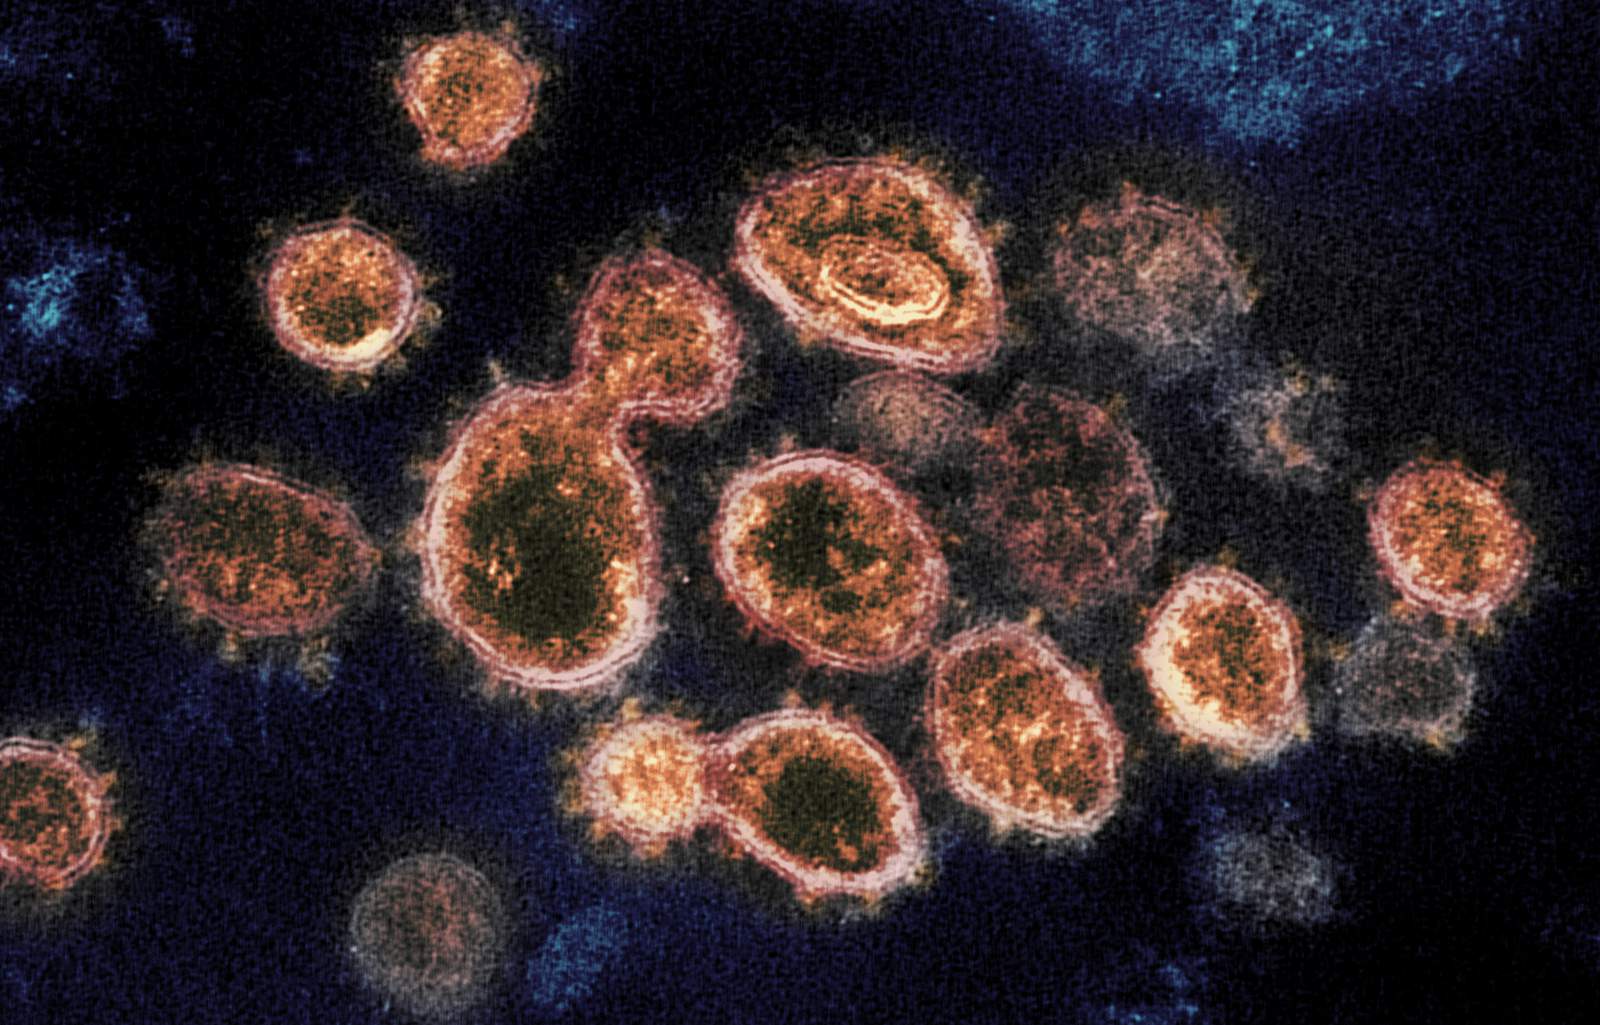 Highly contagious virus variant identified in 3rd Michigan county